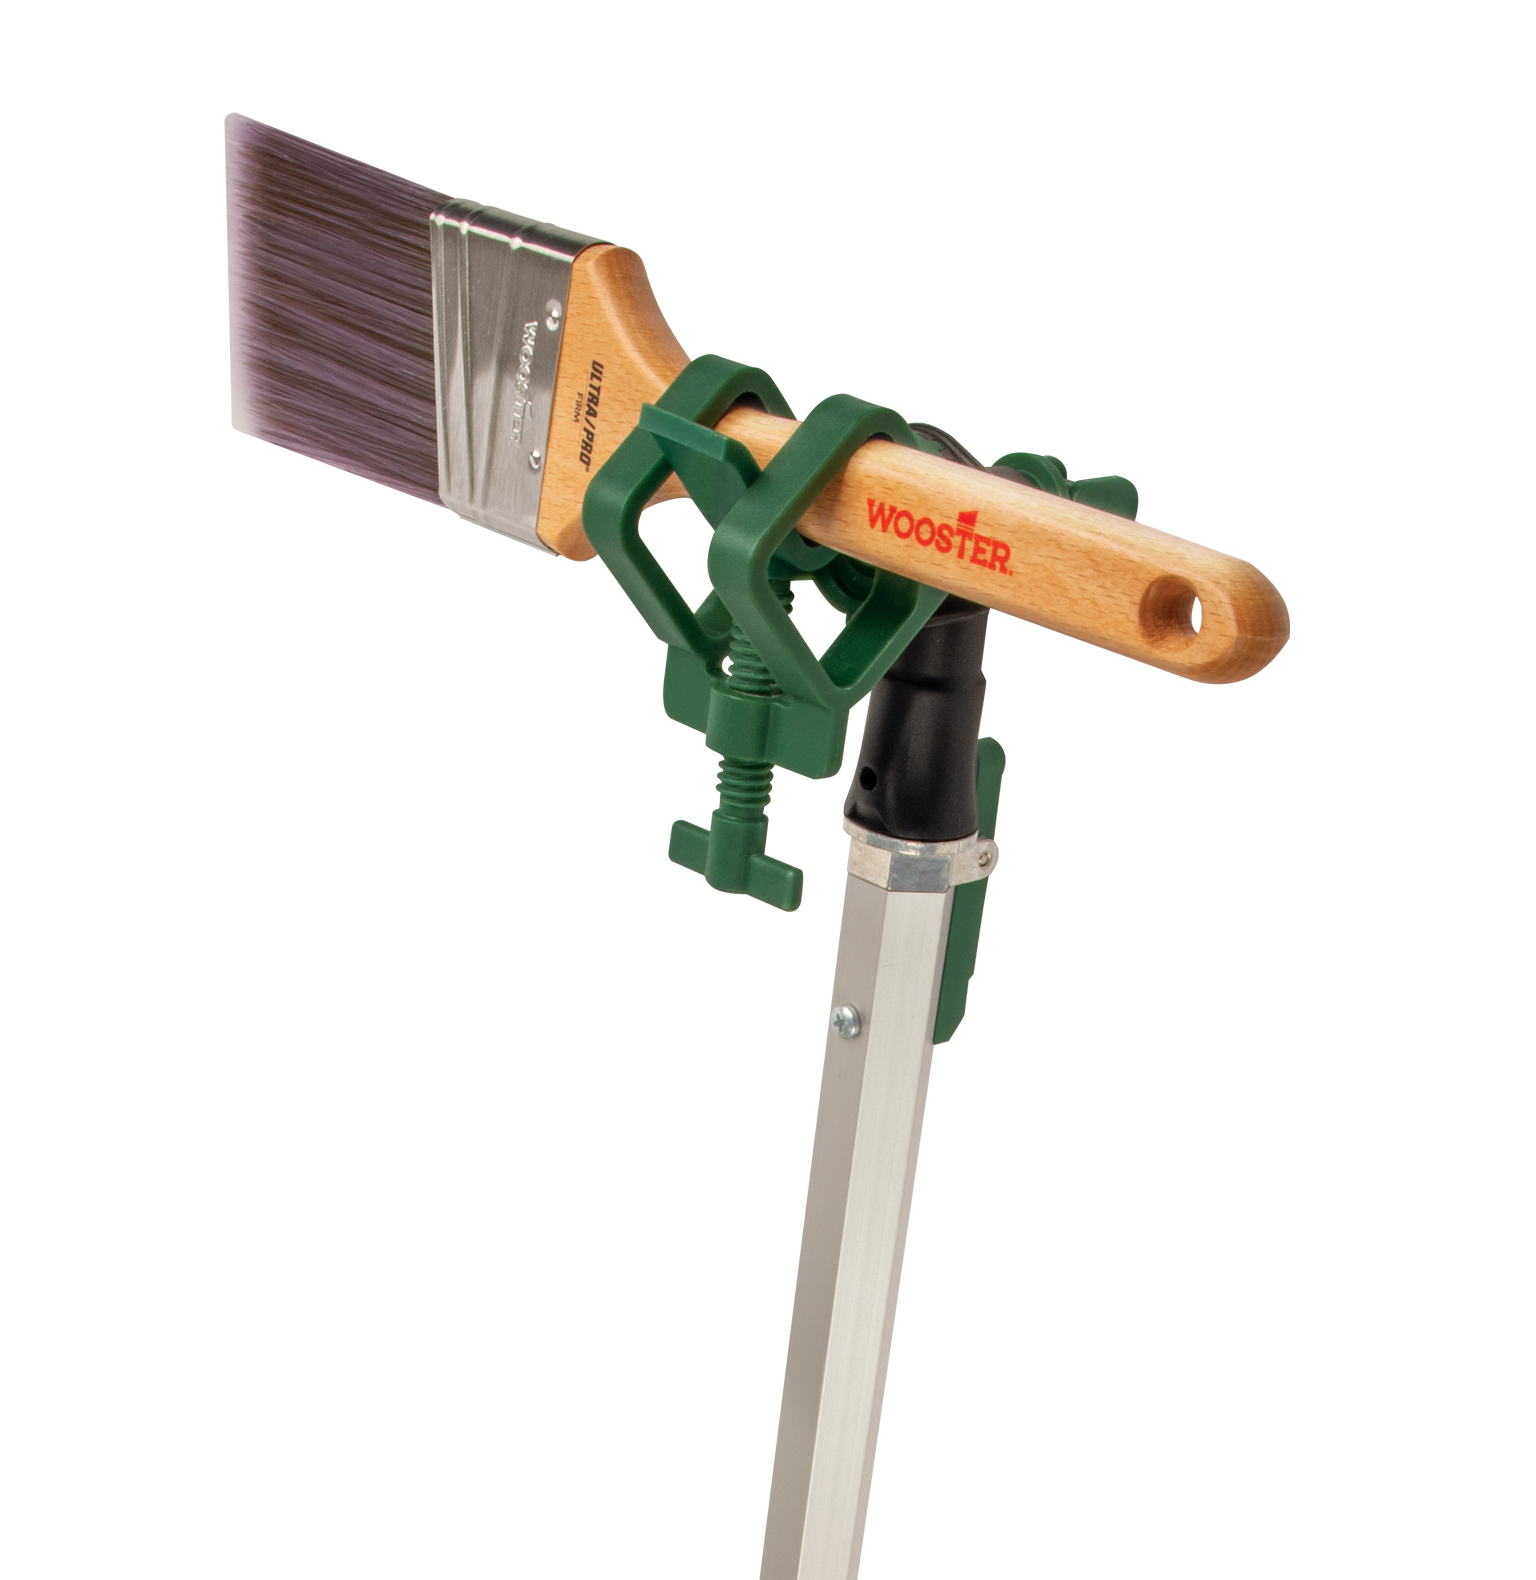 paint brush attached to a pole by a Lock Jaw tool holder accessory